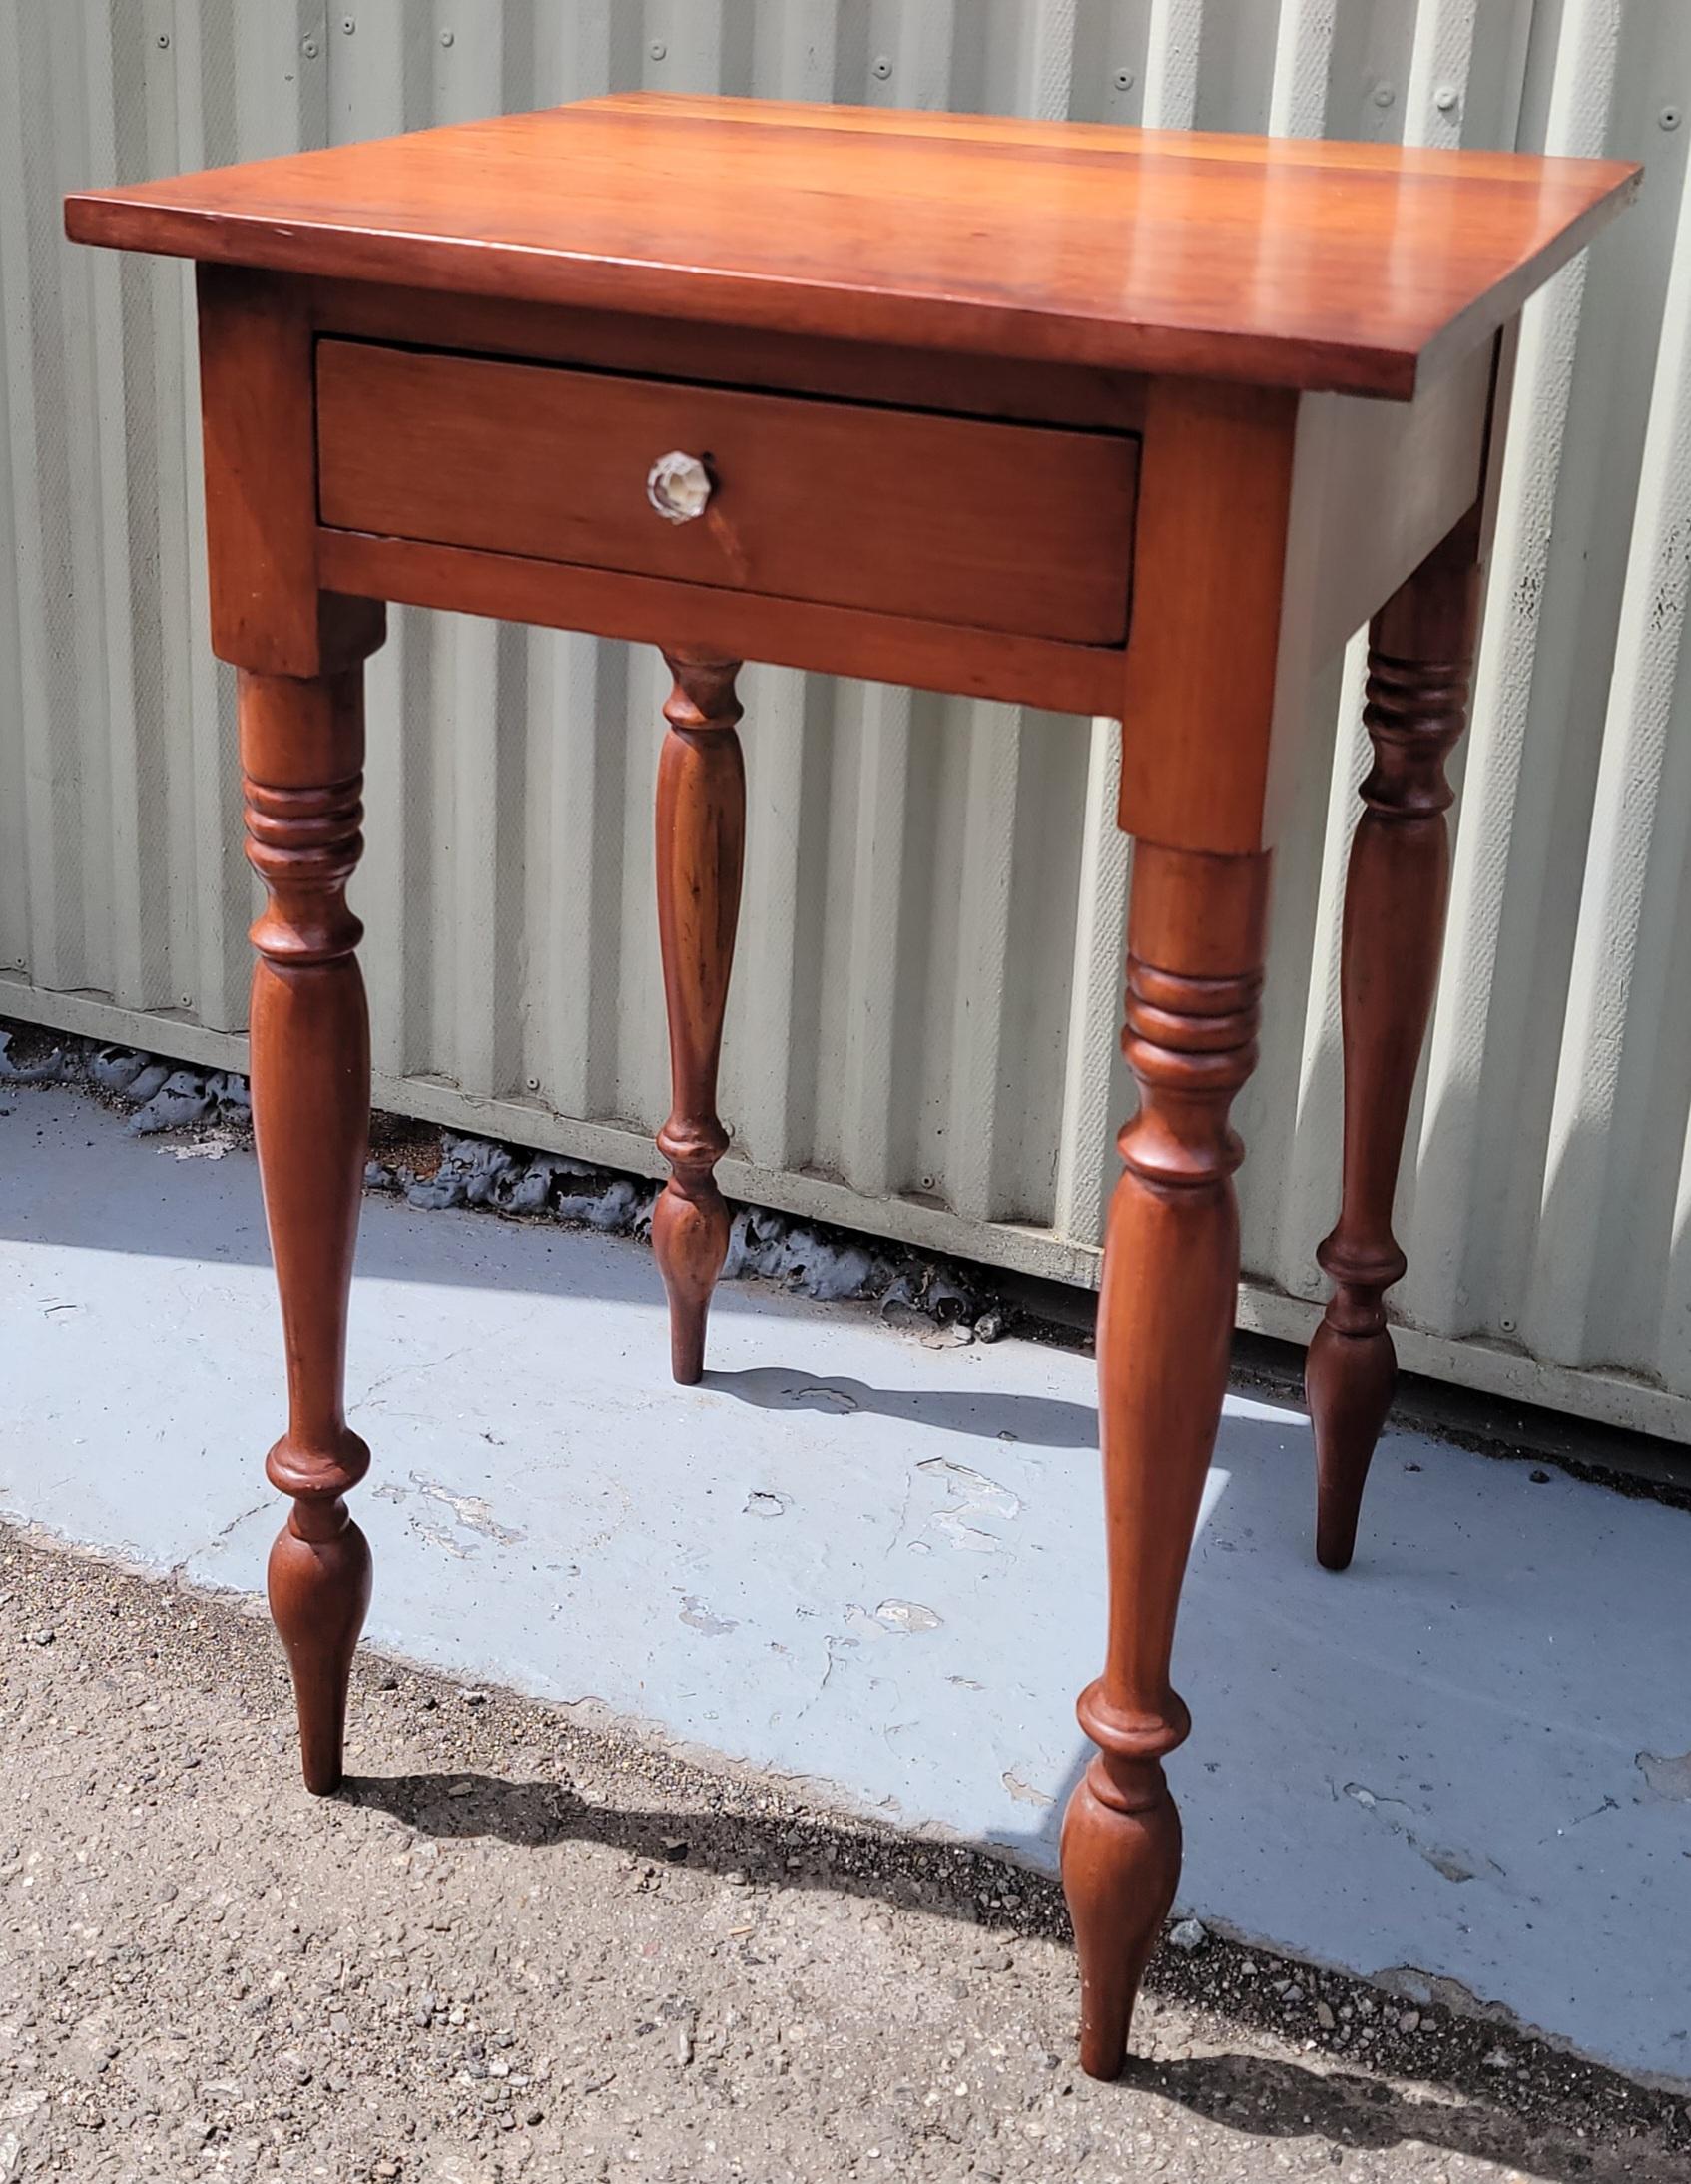 19th century tall walnut one drawer nightstand with original glass drawer pull.The drawer is dovetailed construction and pegged throughout.The condition is amazing and tall turned legs are finely carved.